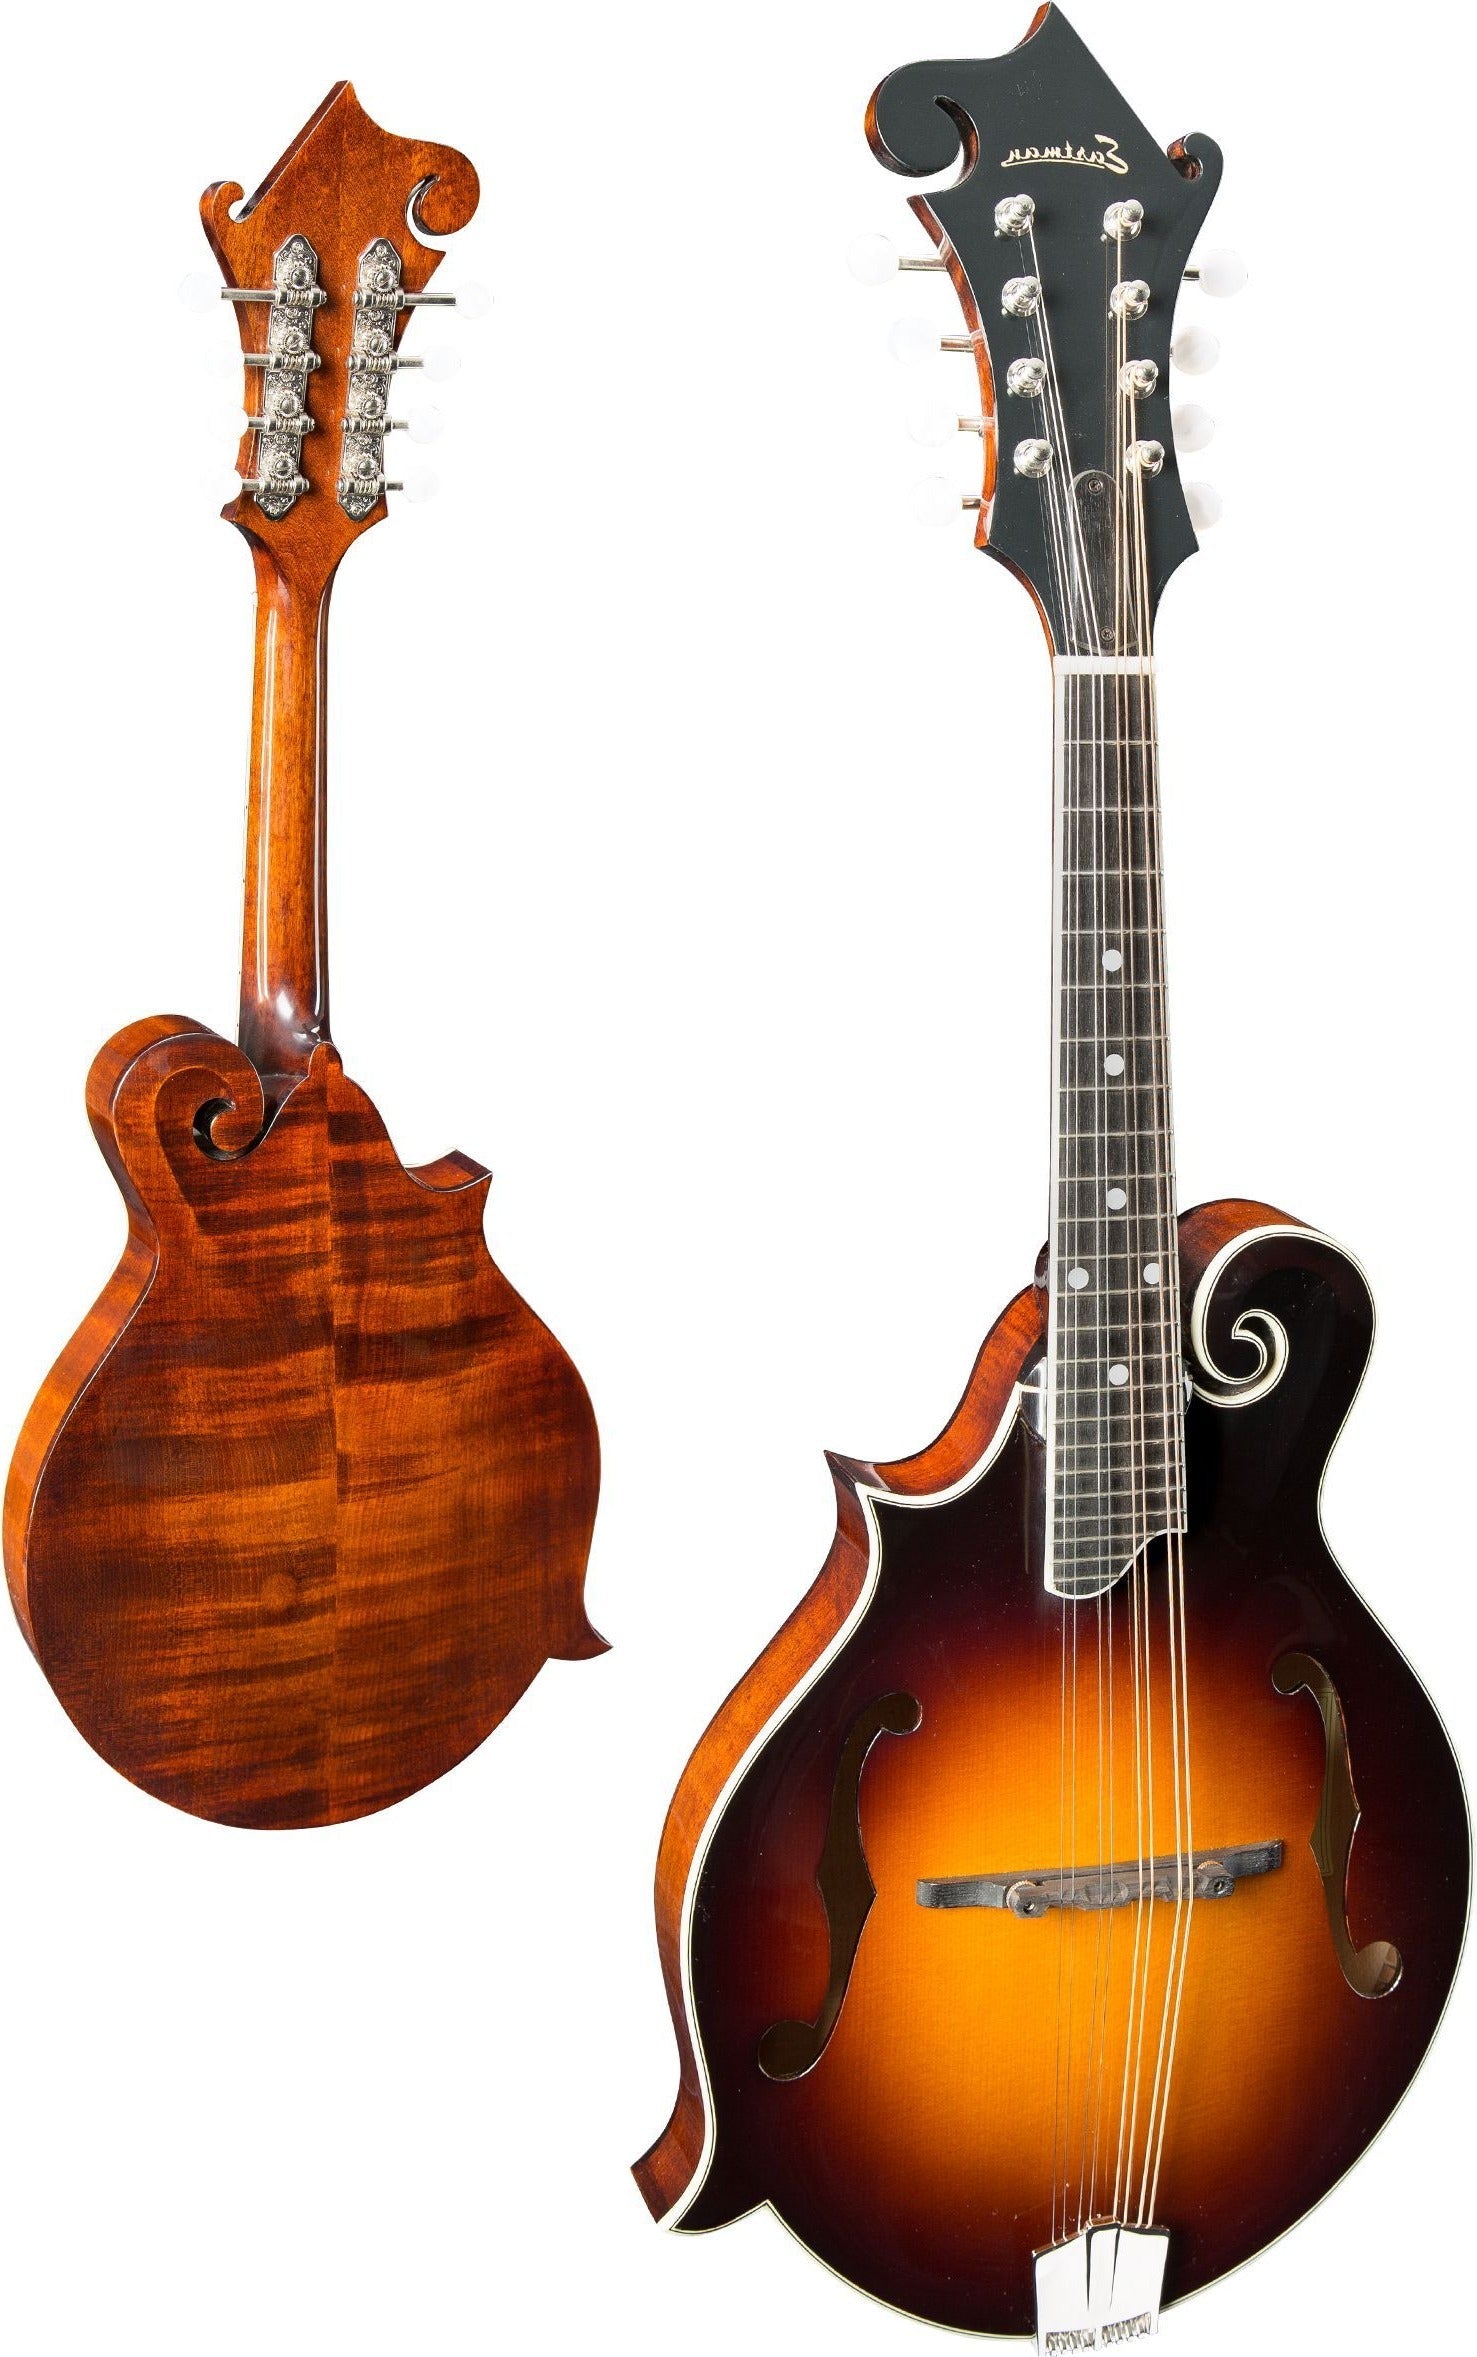 Eastman MD515L F-style F-holes Mandolin, Left handed (Solid Spruce top, Solid Maple back and sides, w/Case), Mandolin for sale at Richards Guitars.